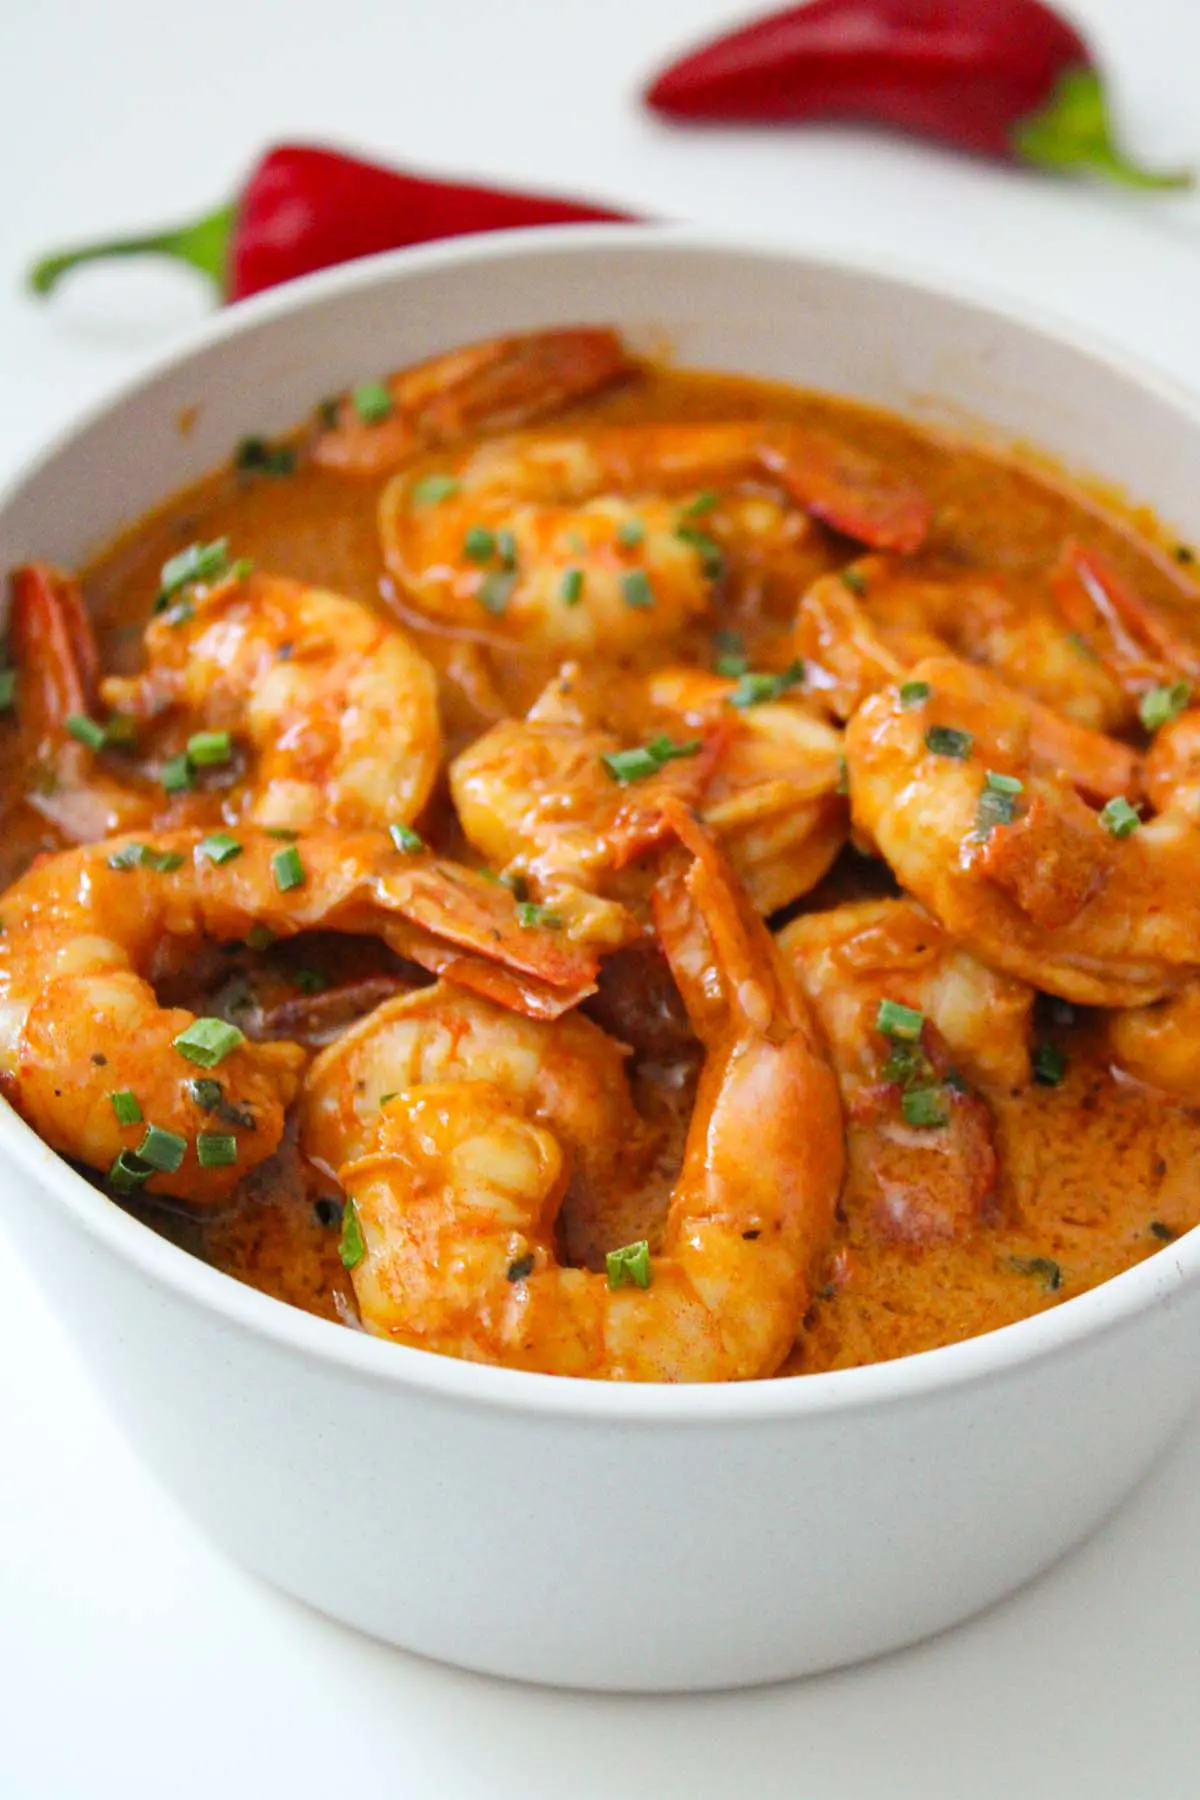 Make this easy voodoo shrimp recipe right at home